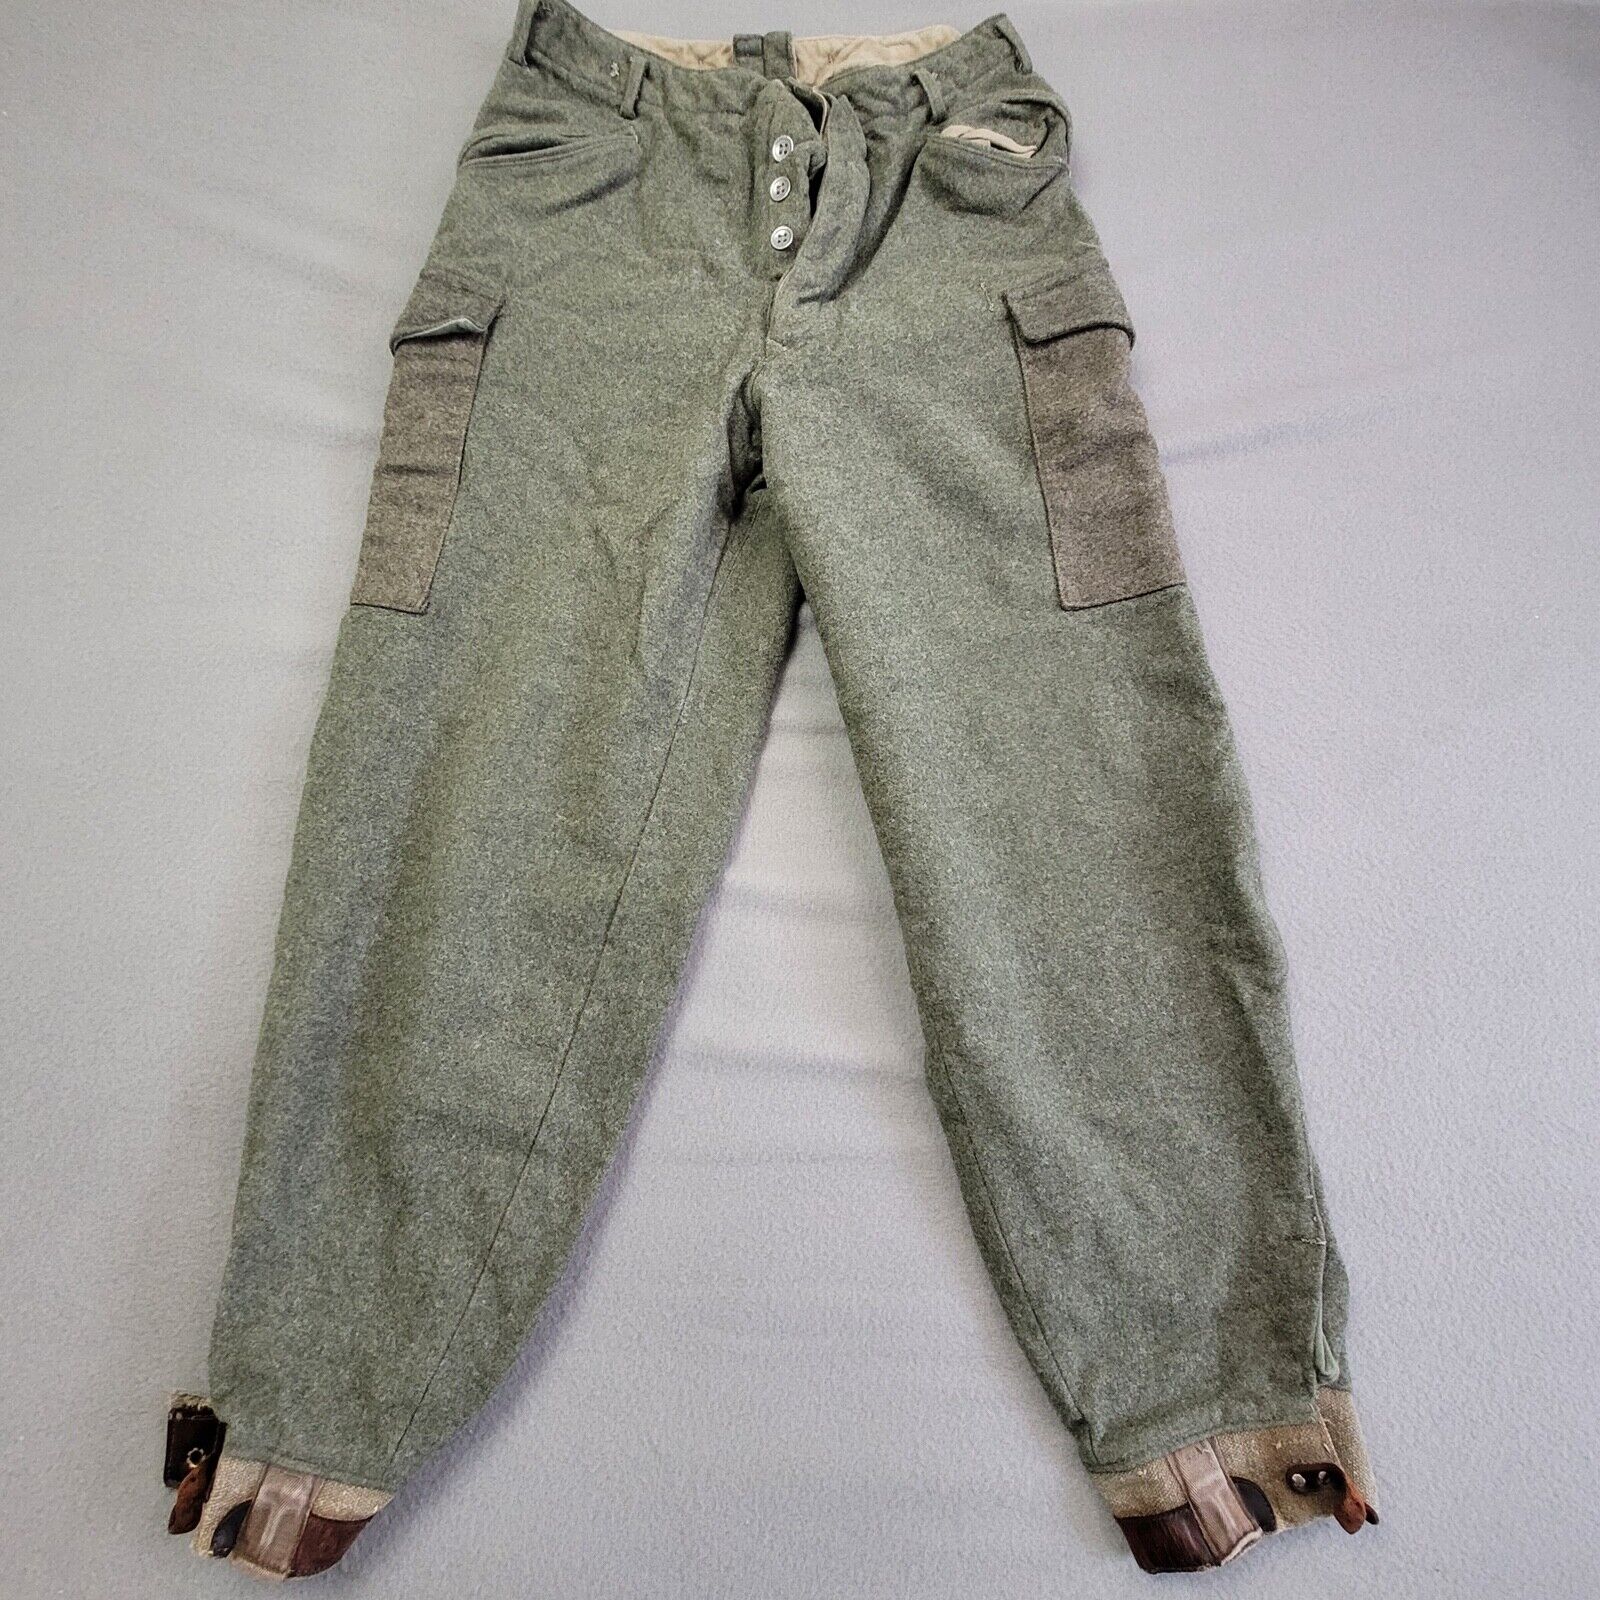 Vintage WW2 1941 Swedish Military Wool Pants Trousers Heavy Button Fly 32x29